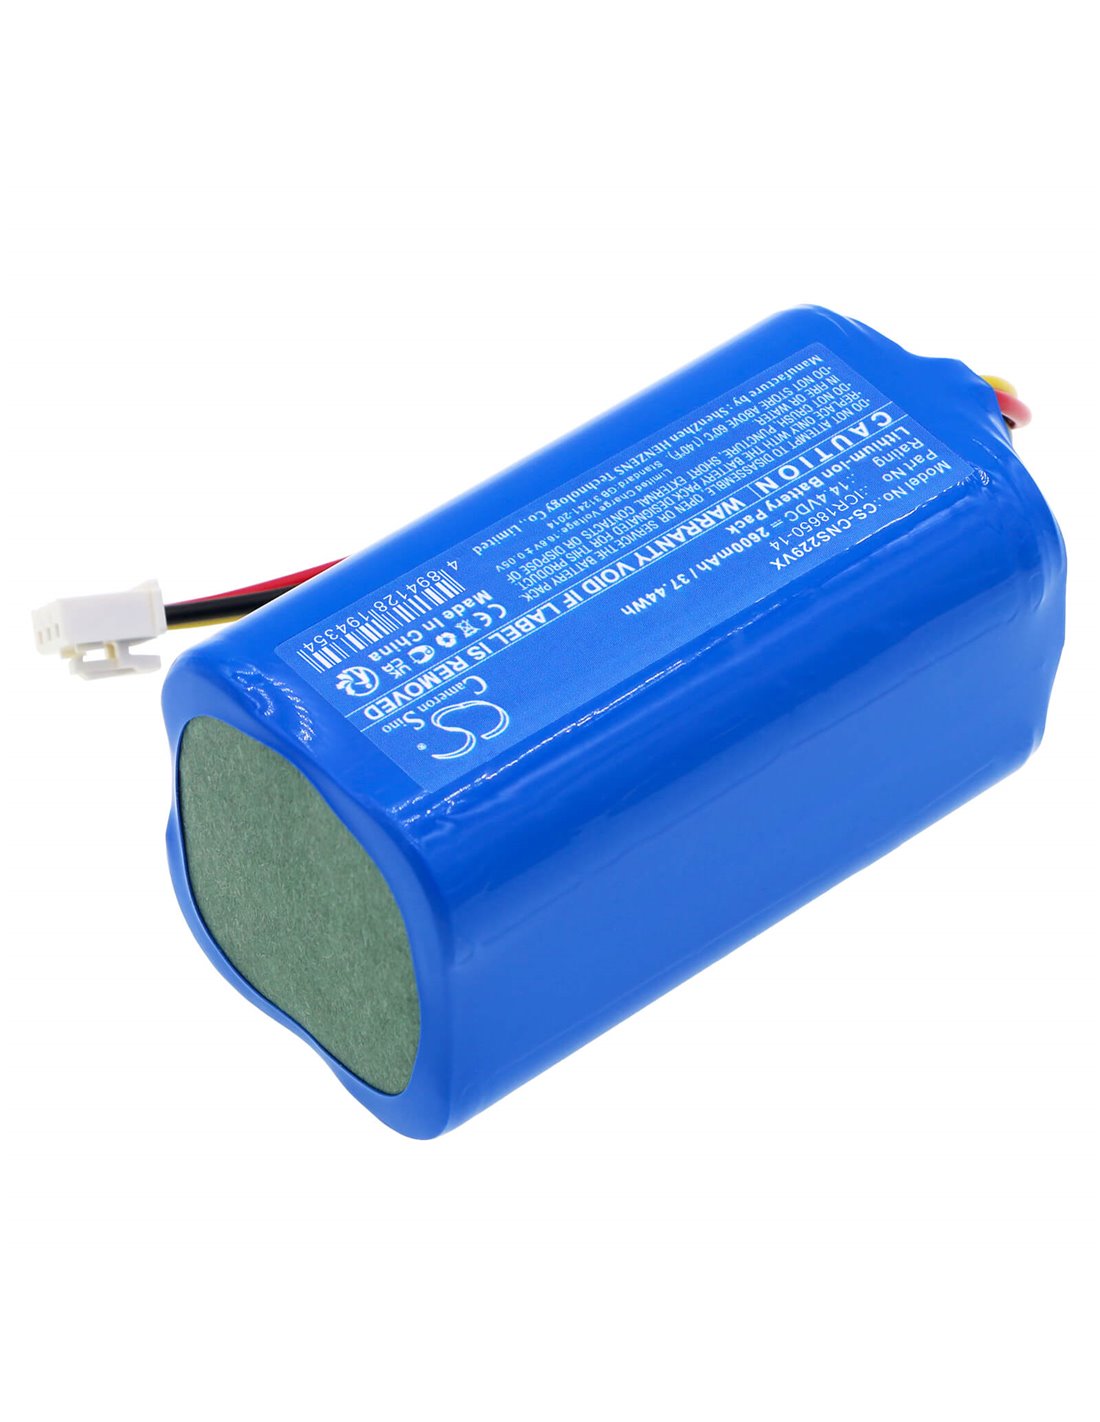 Cecotec, Conga 2299, Conga 2299 Ultra Home Vital Replacement Battery  shipped from Canada